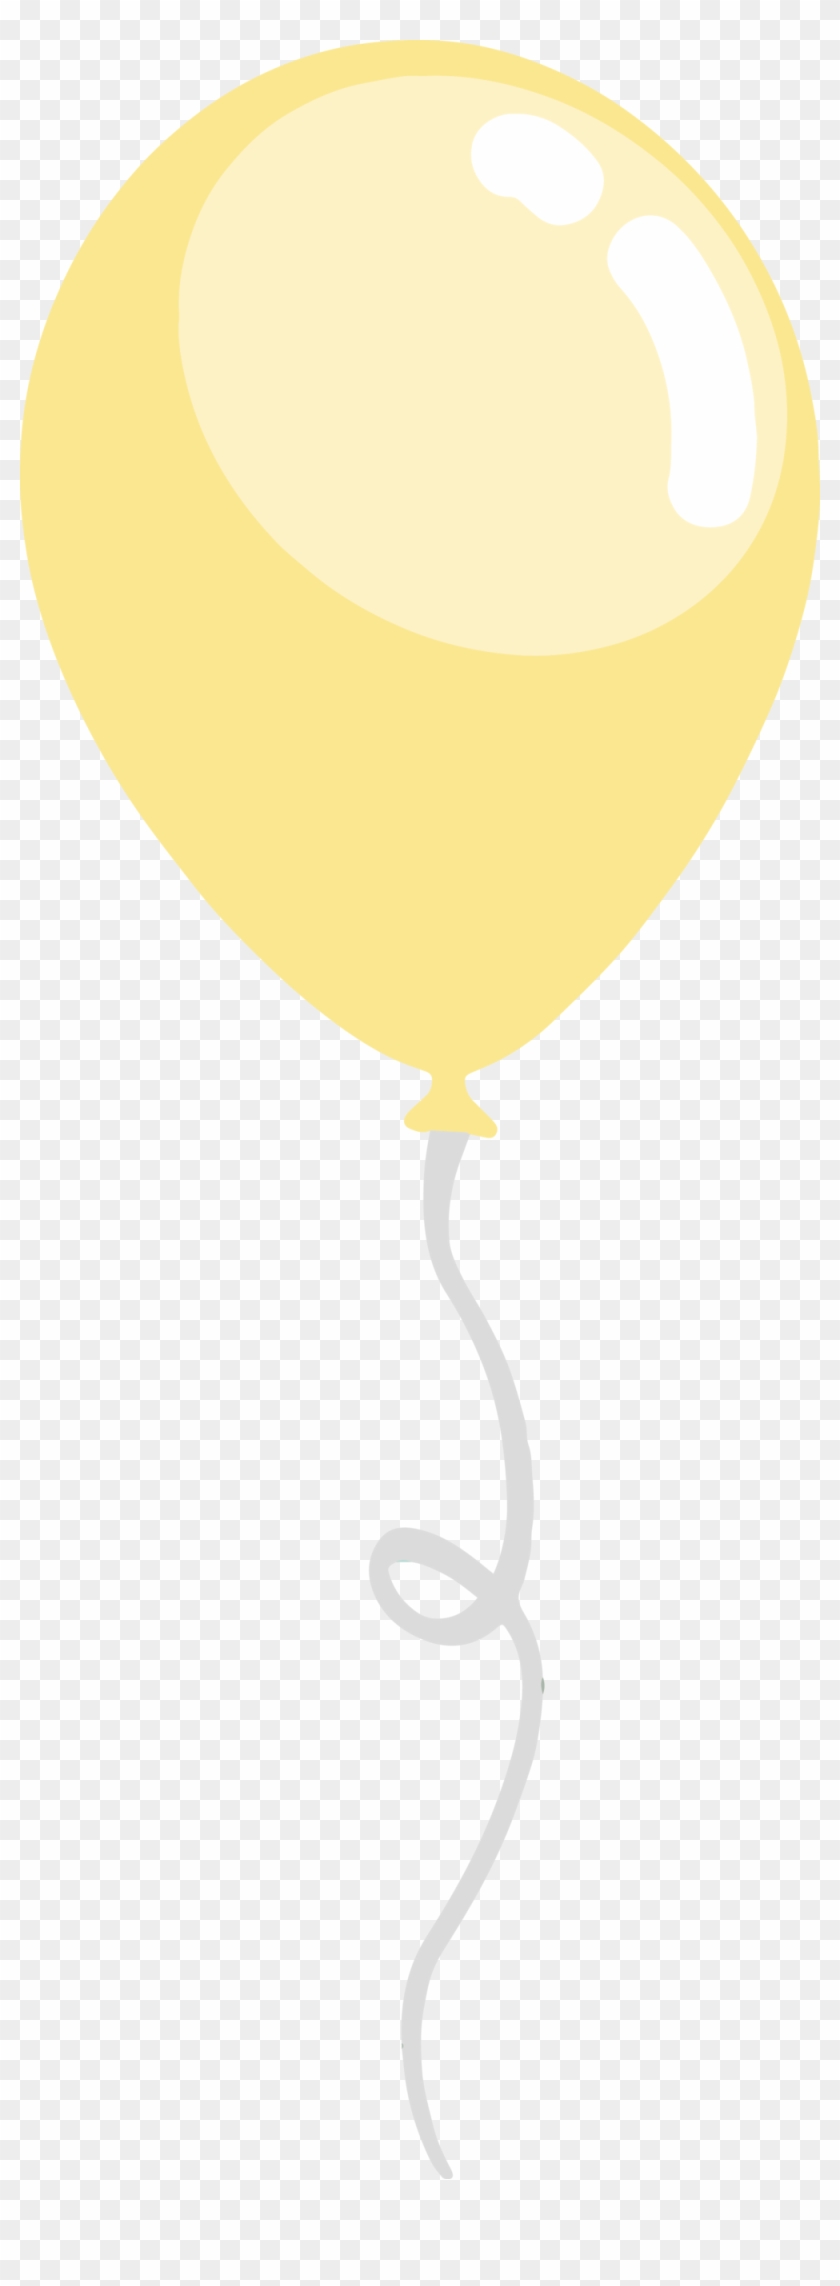 Balloon Pastel Yellow Balloons Png Free Transparent Png Clipart Images Download